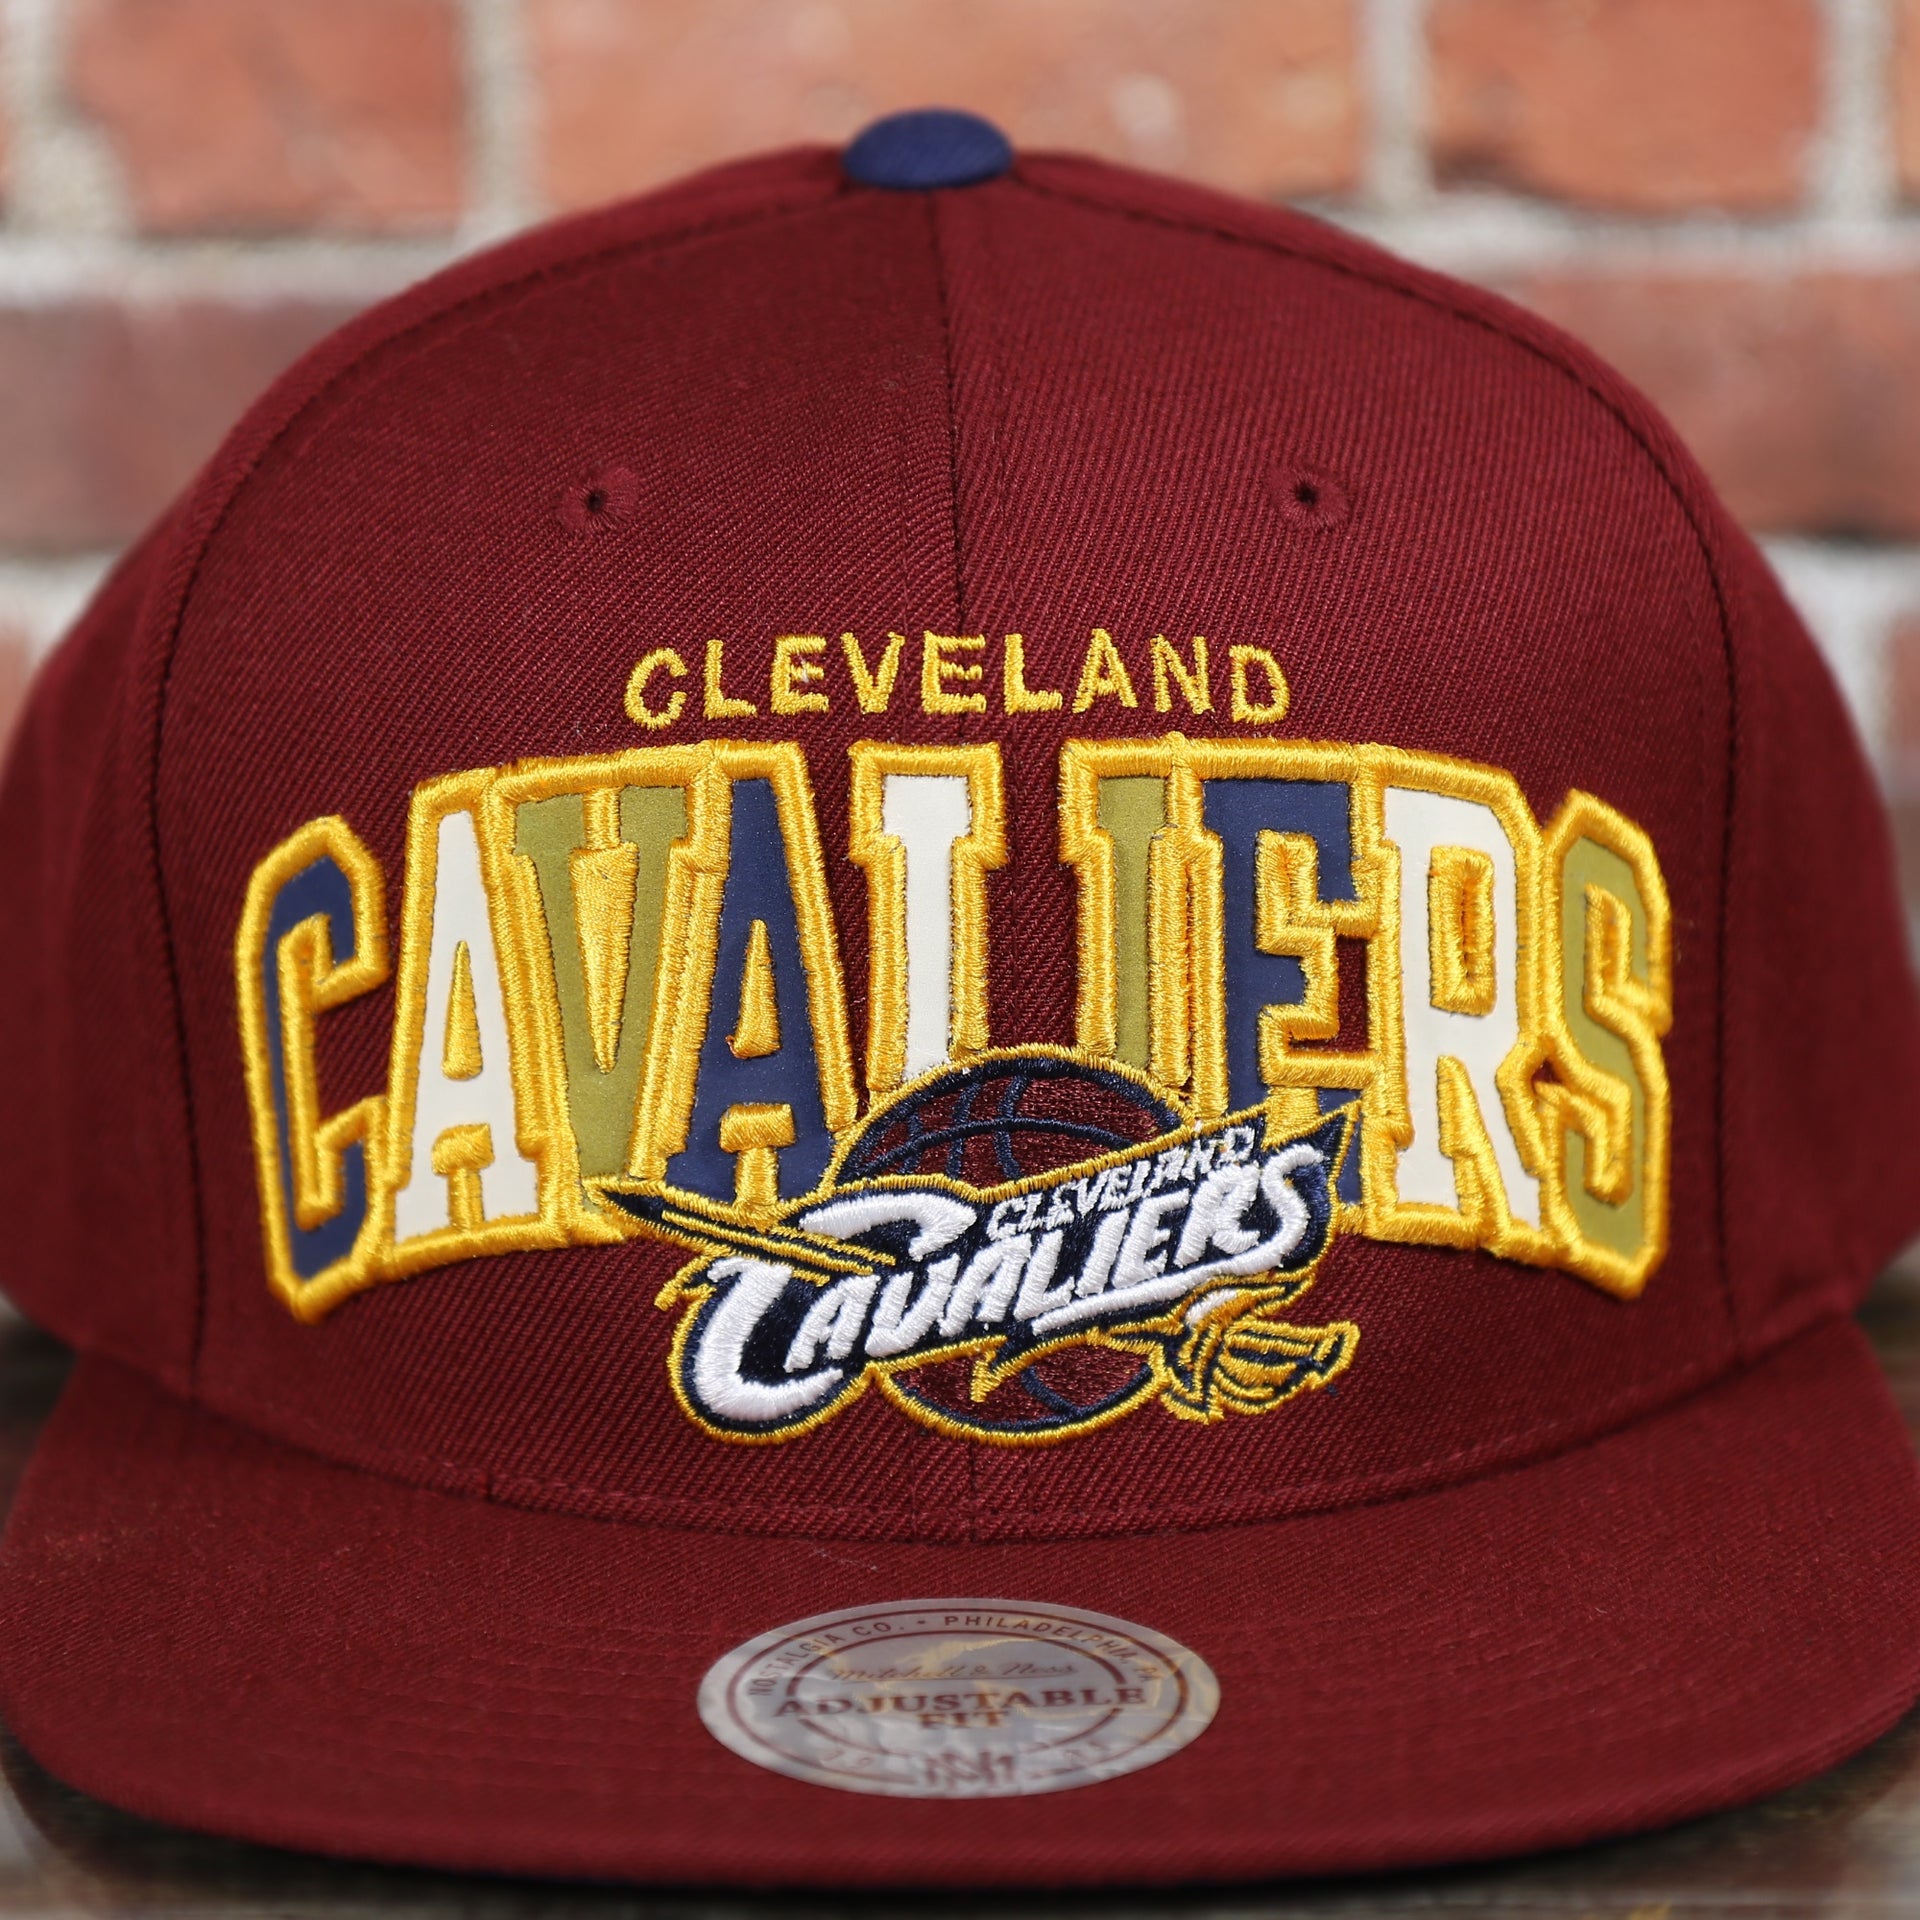 cavaliers logo and lettering on the Cleveland Cavaliers Reflective Lettering Maroon Snapback Hat